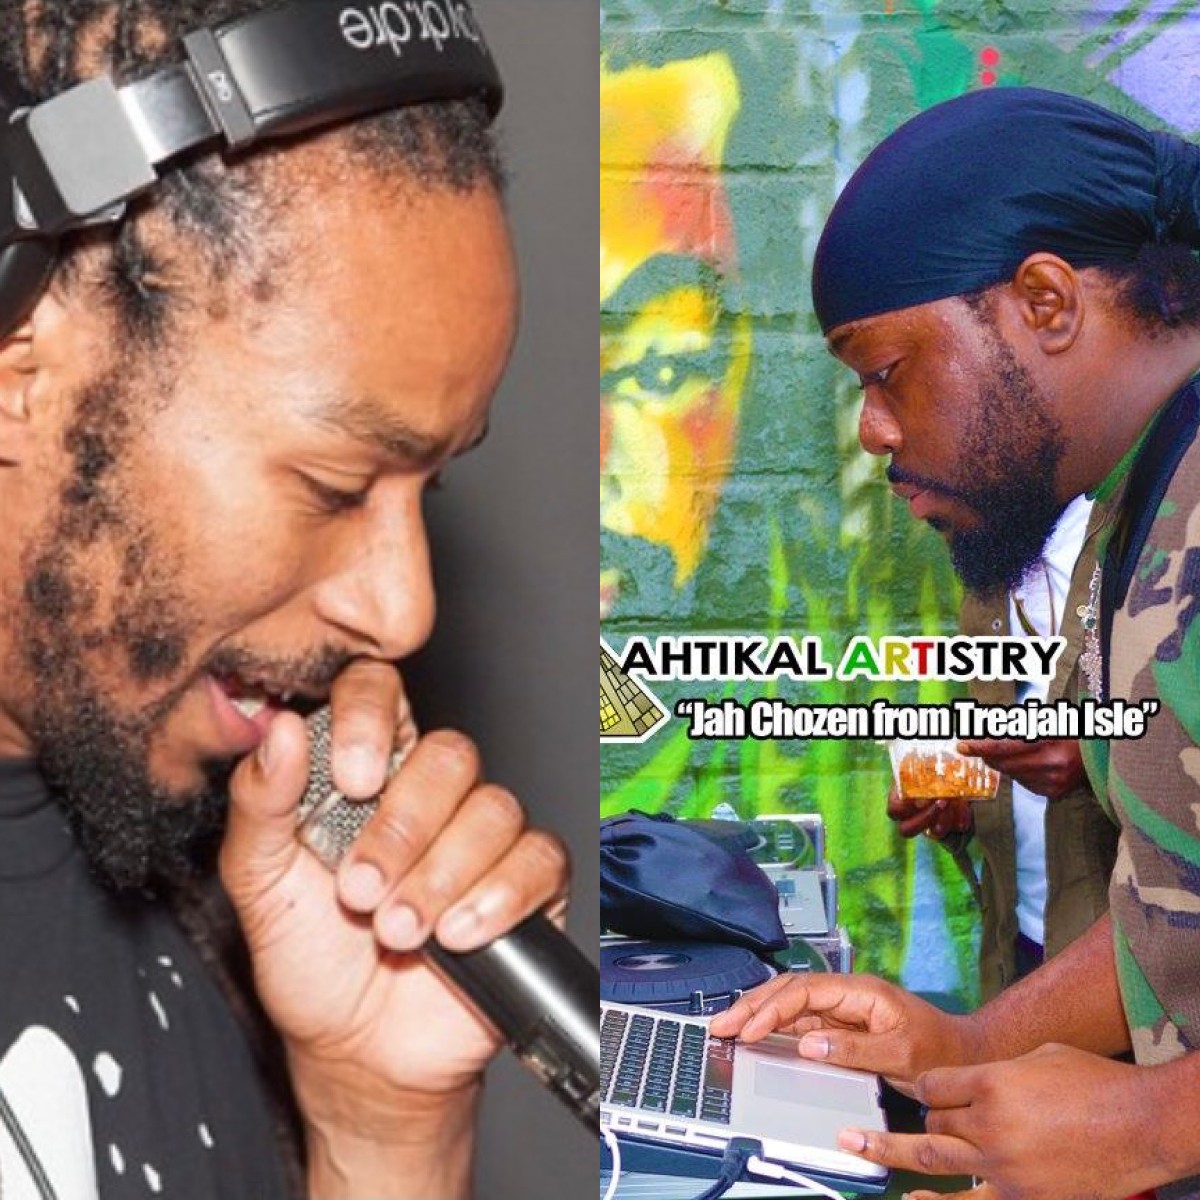 Composite headshots of DJs Kevin Hood and Richard Wright, both in profile, Kevin Hart wearing black headphone, black tshirt and speaking into a mic; and Richard Wright in a camo tshirt, navy blue durag, standing over a silver laptop with text reading "Ahtikal Artistry, Jah Chozen from Trejah Isle" imposed on the phot.  